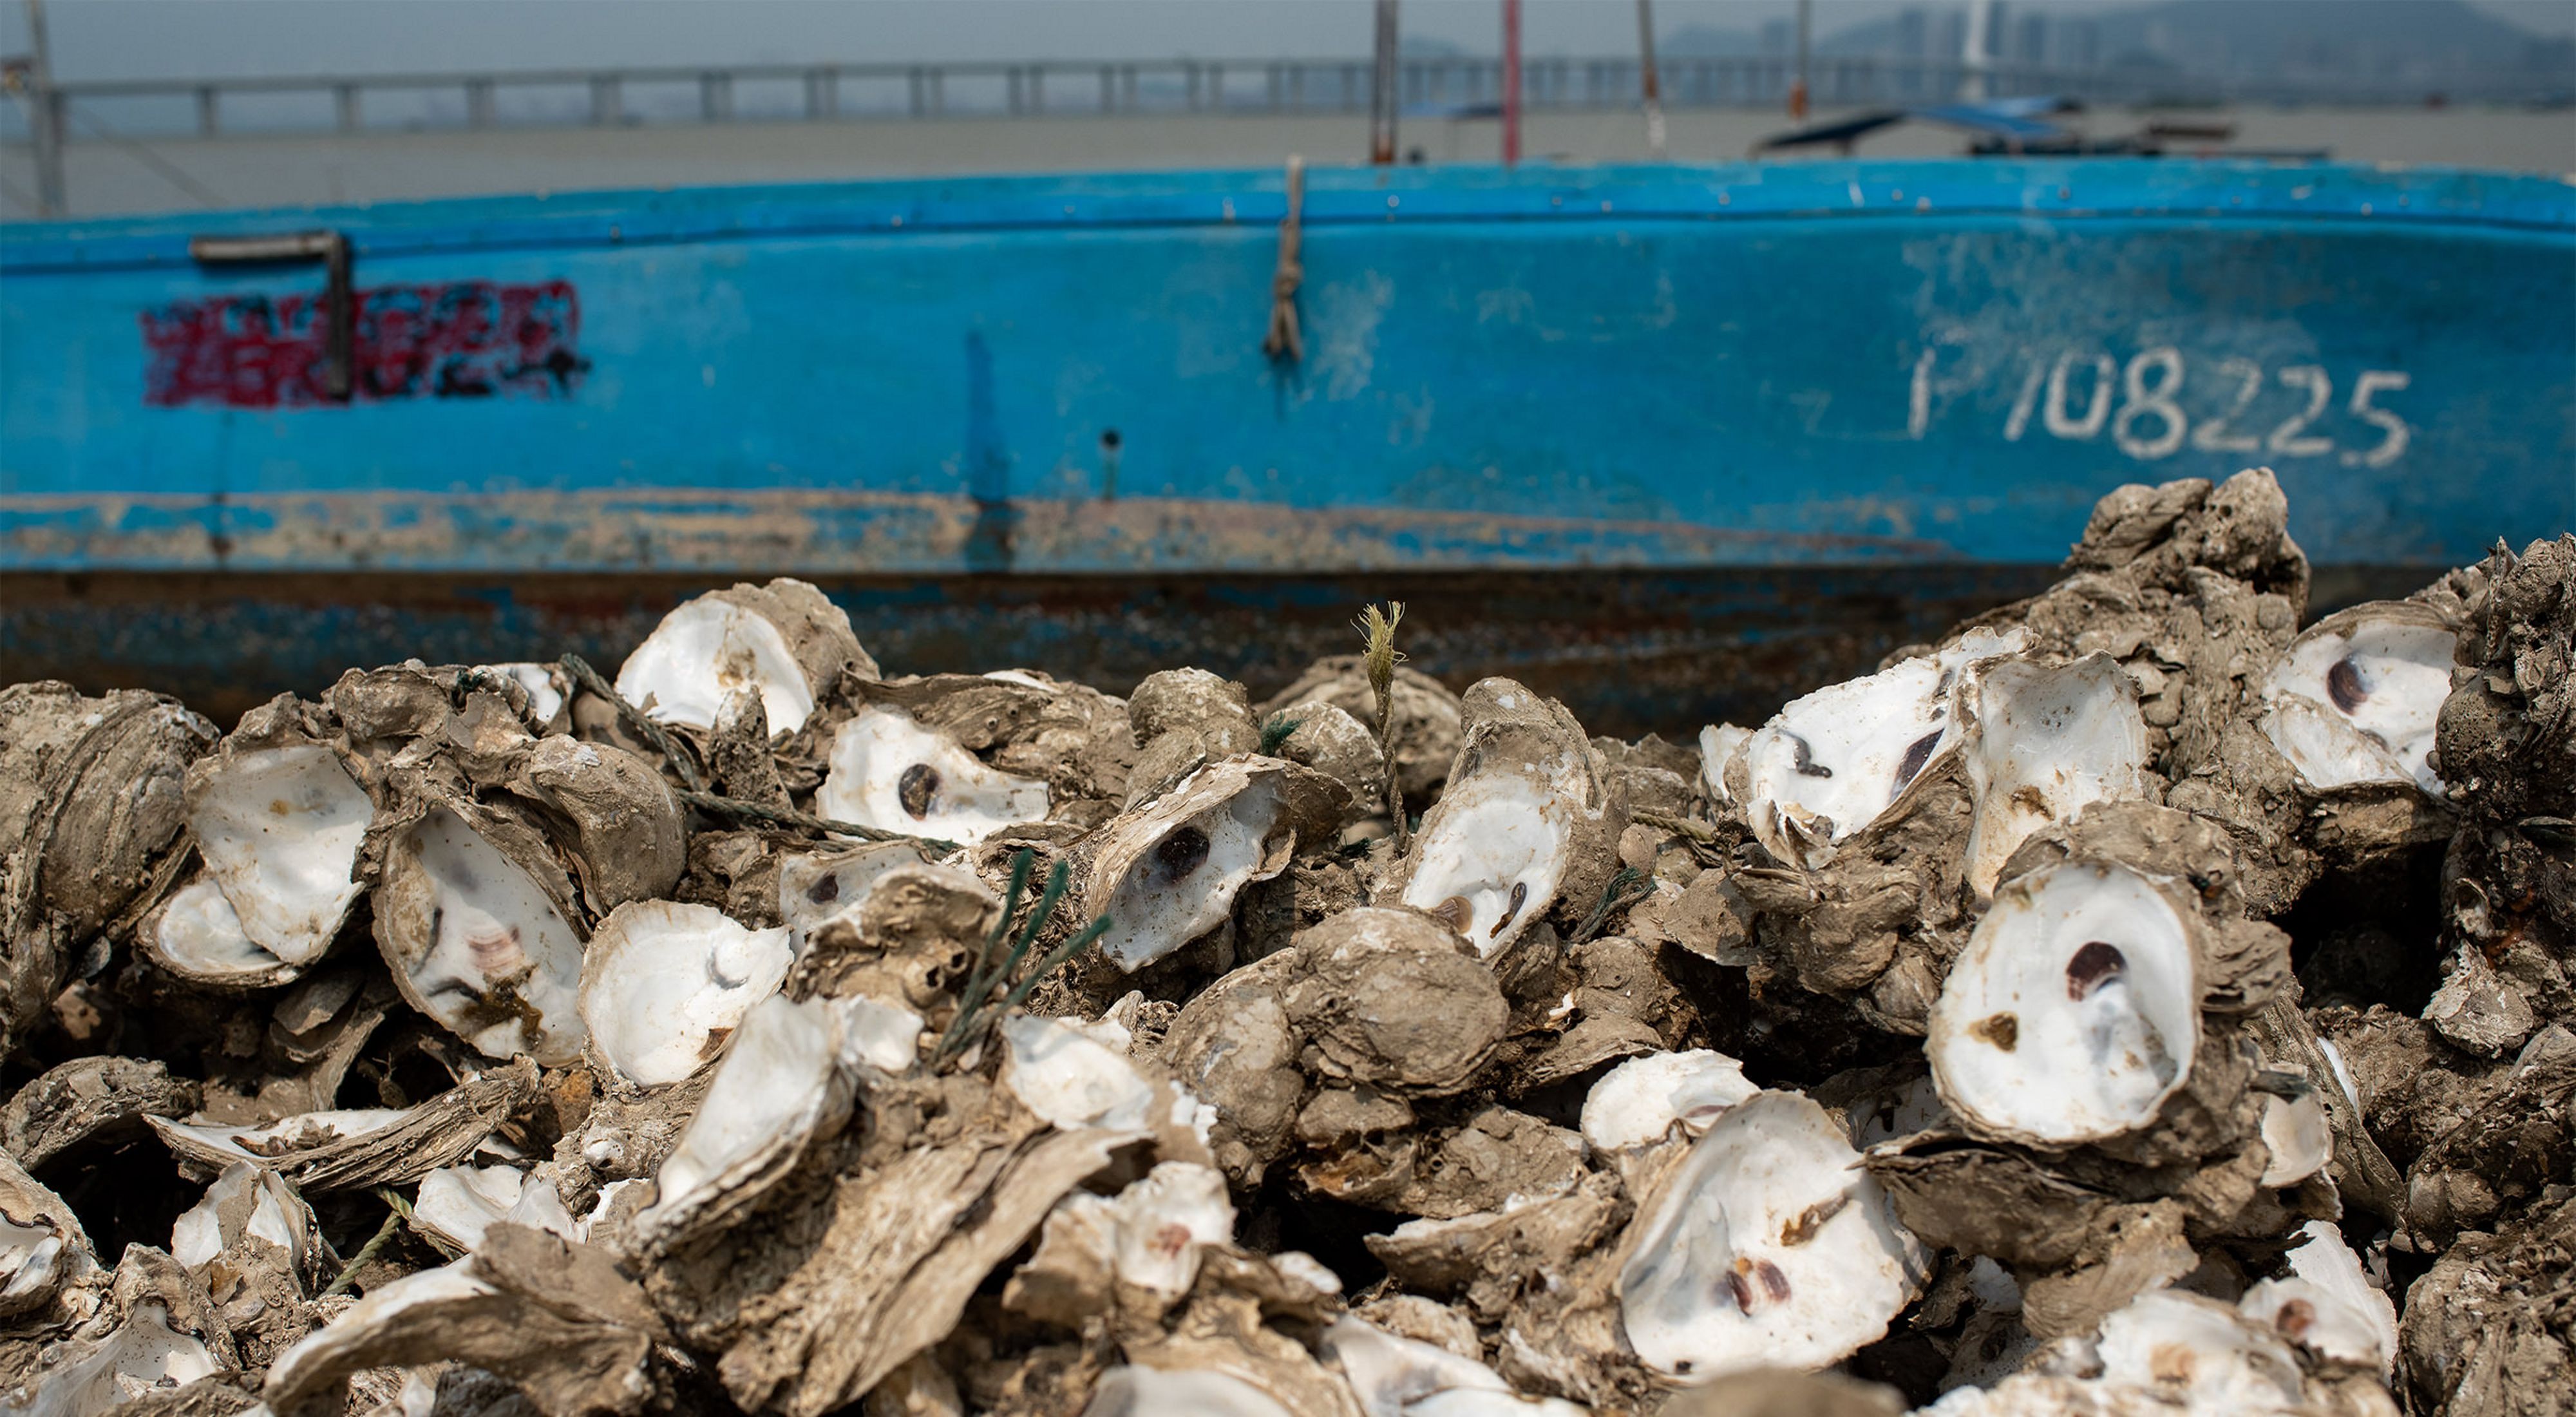 Oyster shells in a pile are open and empty.